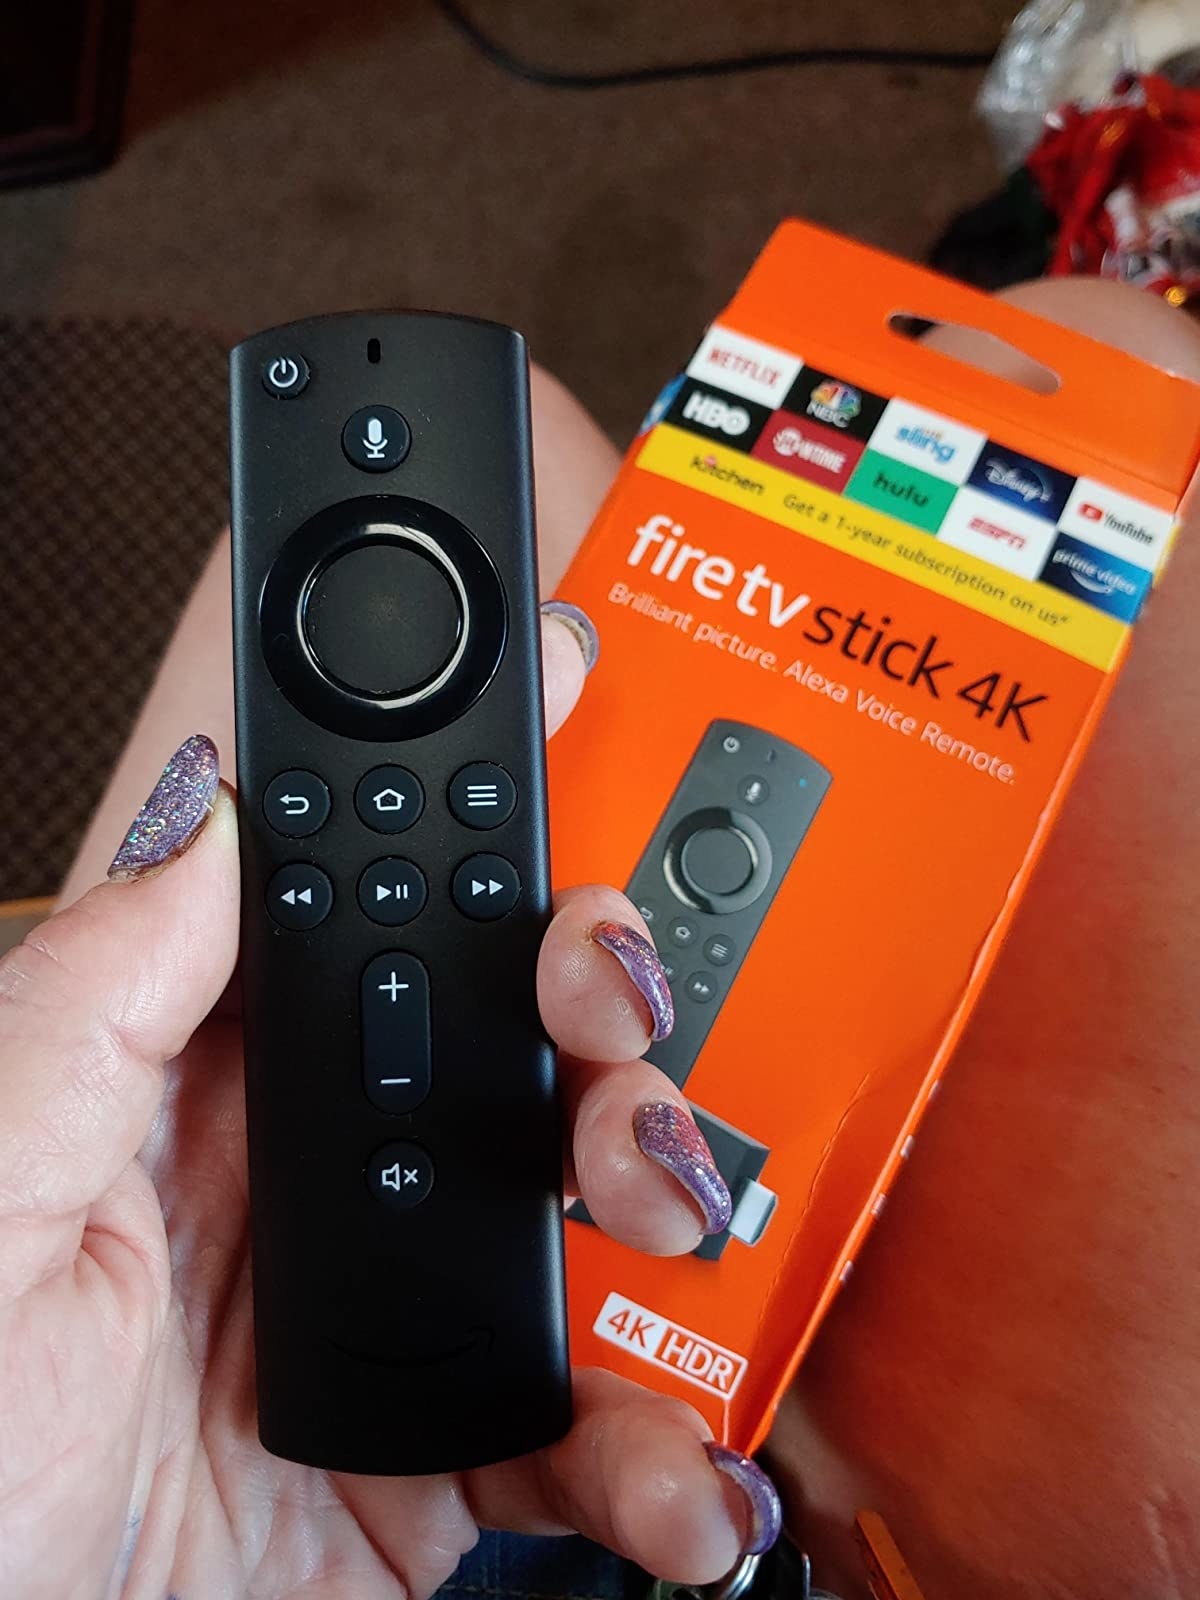 The Fire Stick remote, which has volume, power, and voice control buttons